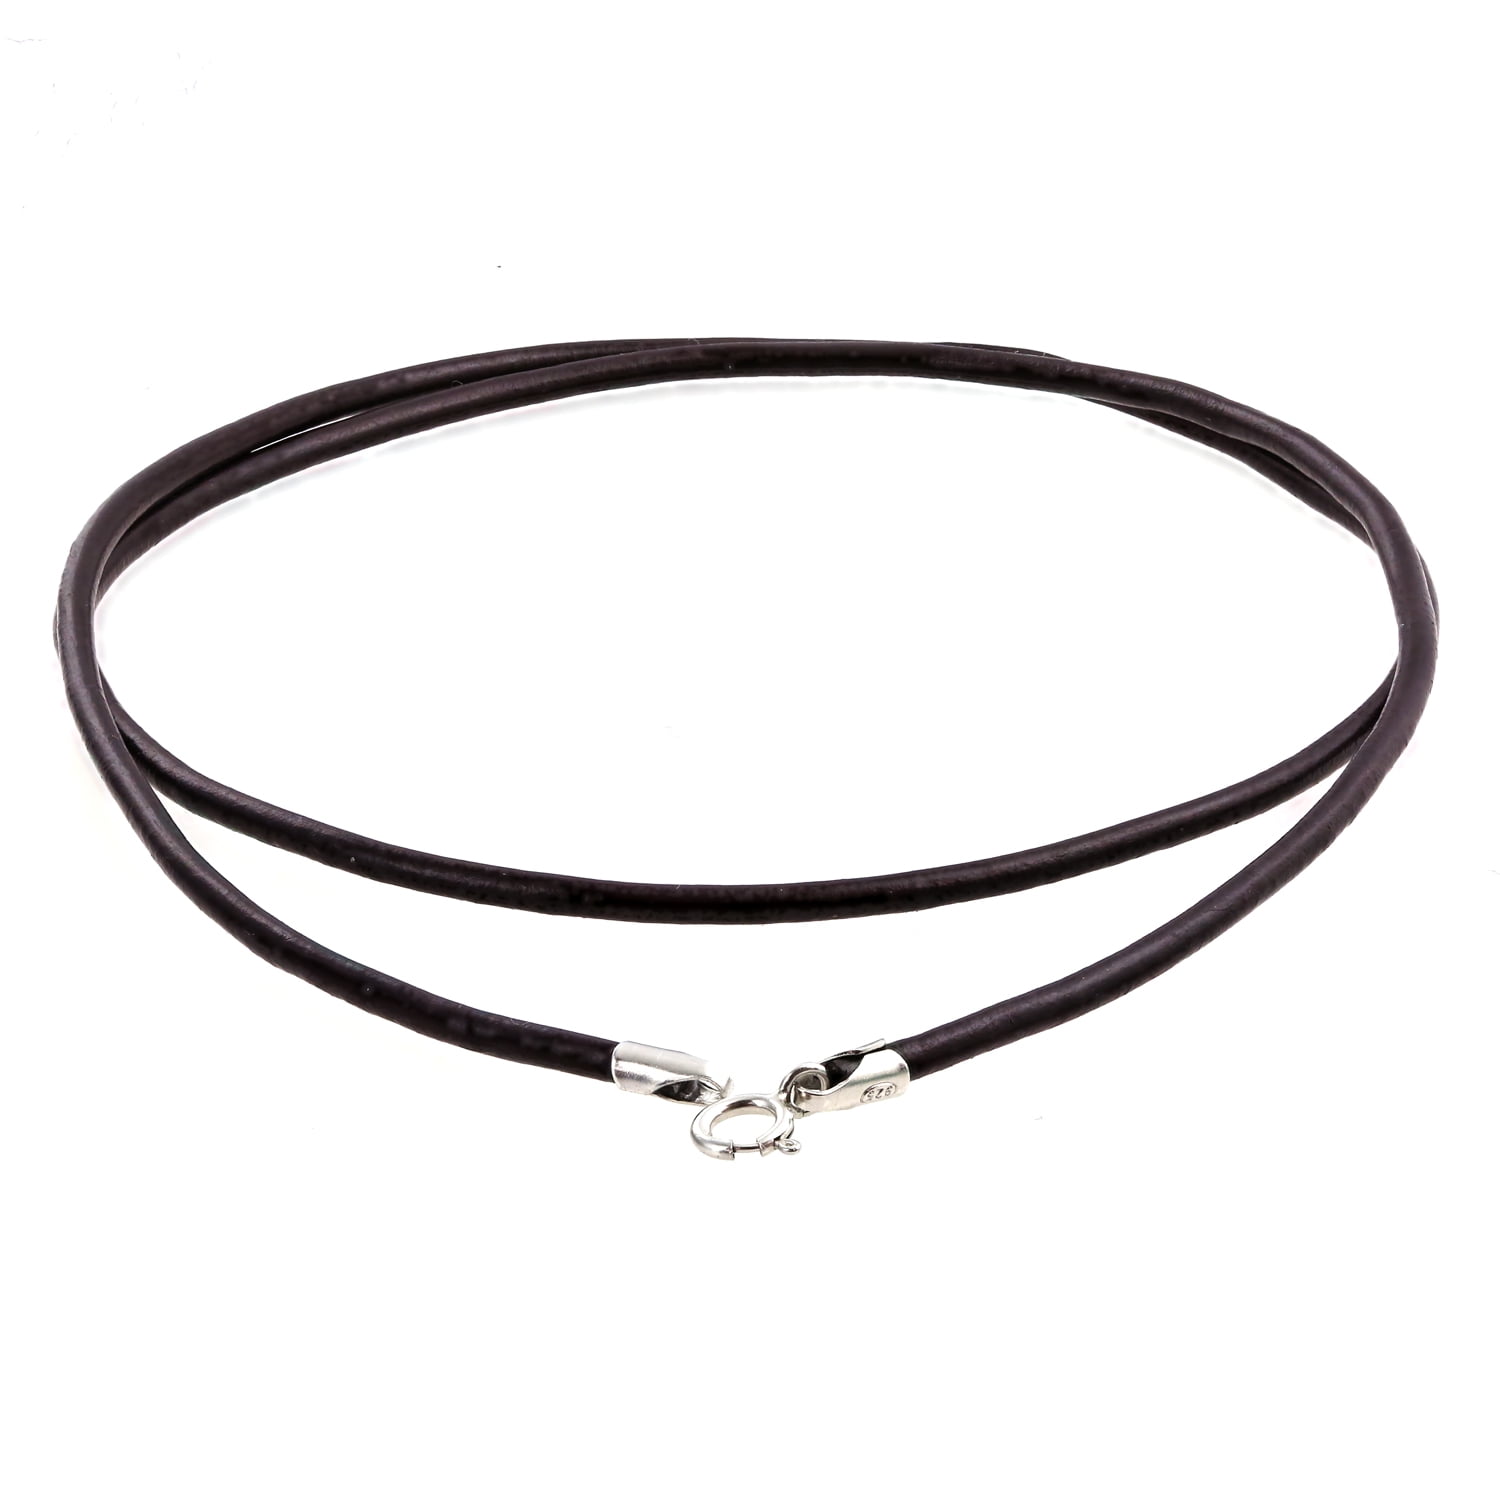 4mm real leather cord choker necklace black or natural with silver plated clasps 